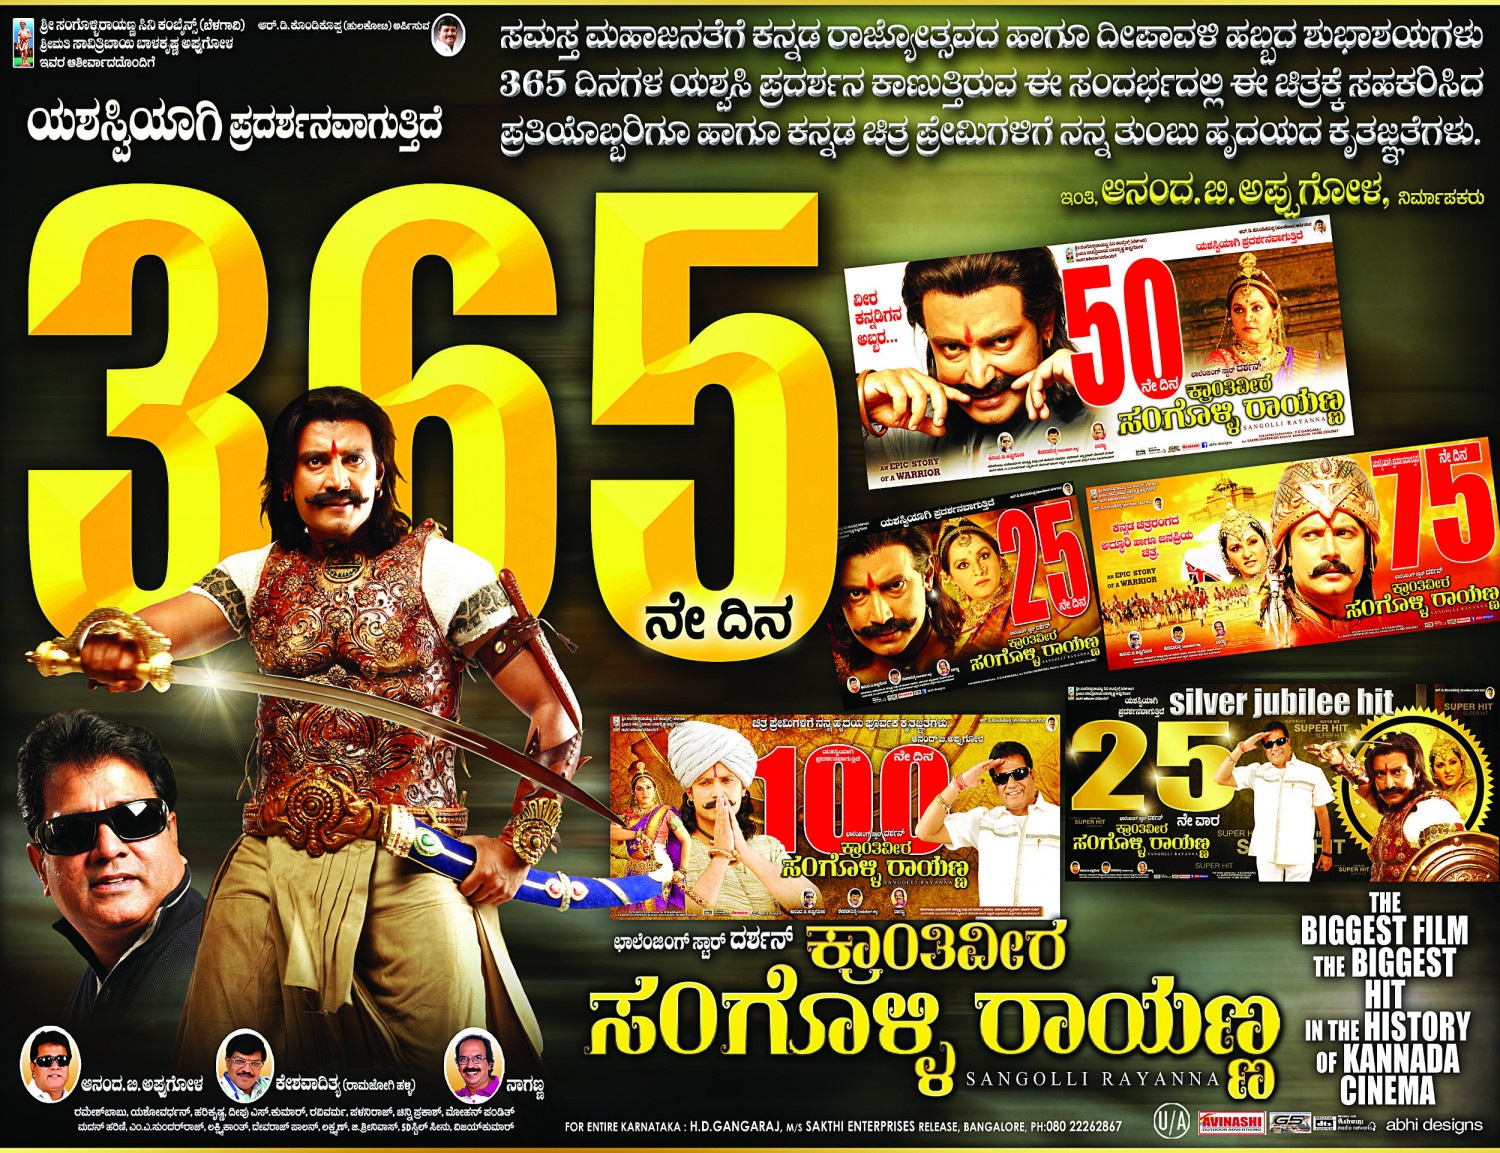 Extra Large Movie Poster Image for Sangolli Rayanna (#77 of 79)